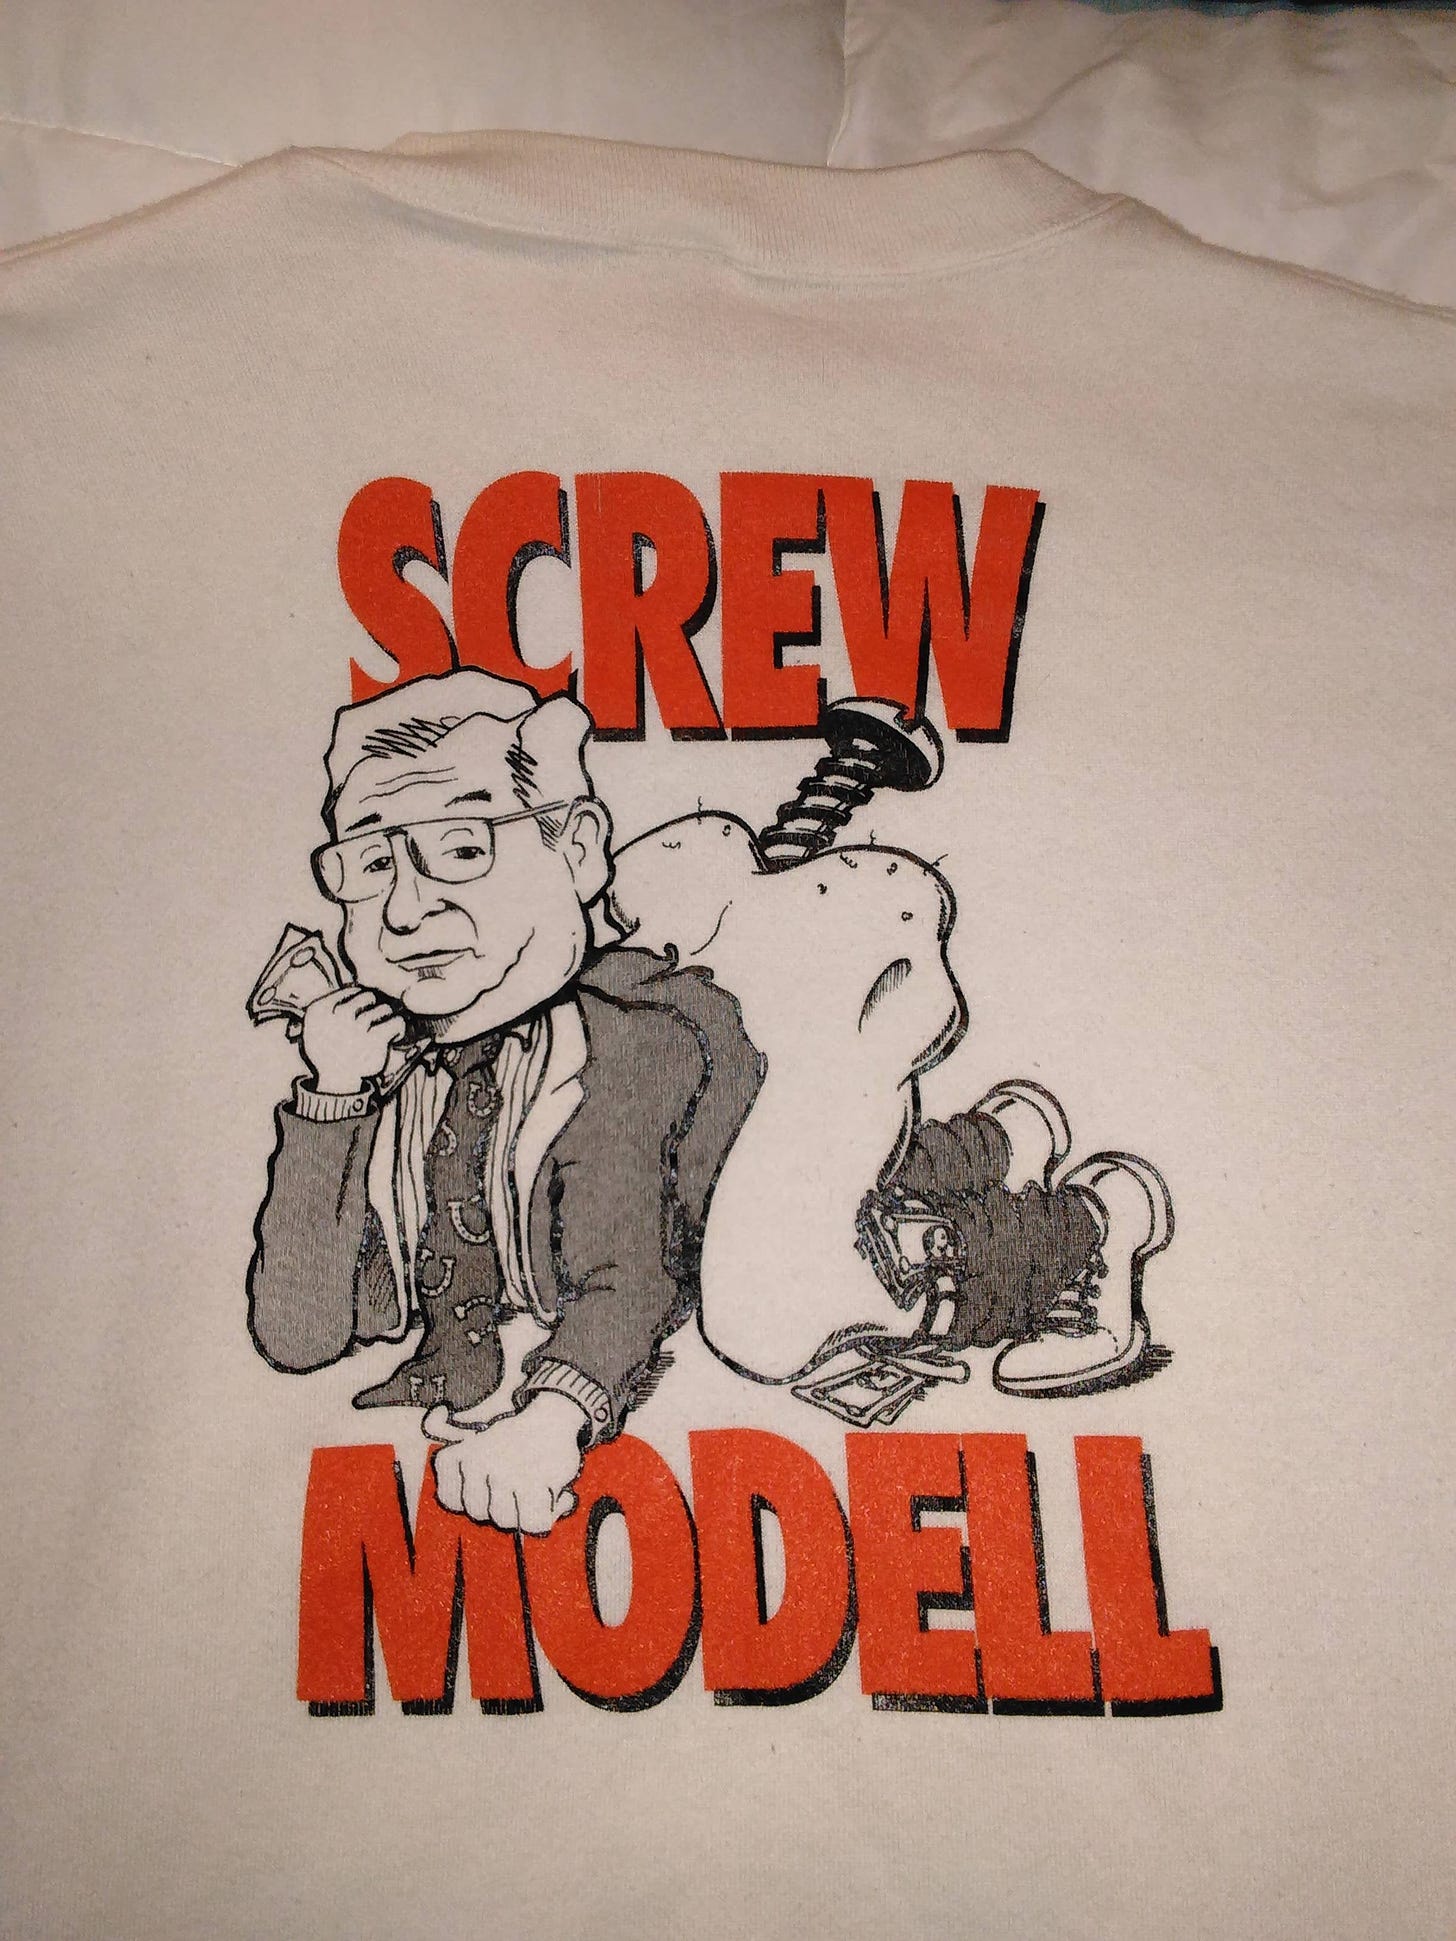 Fuck You Art Modell Day: Browns